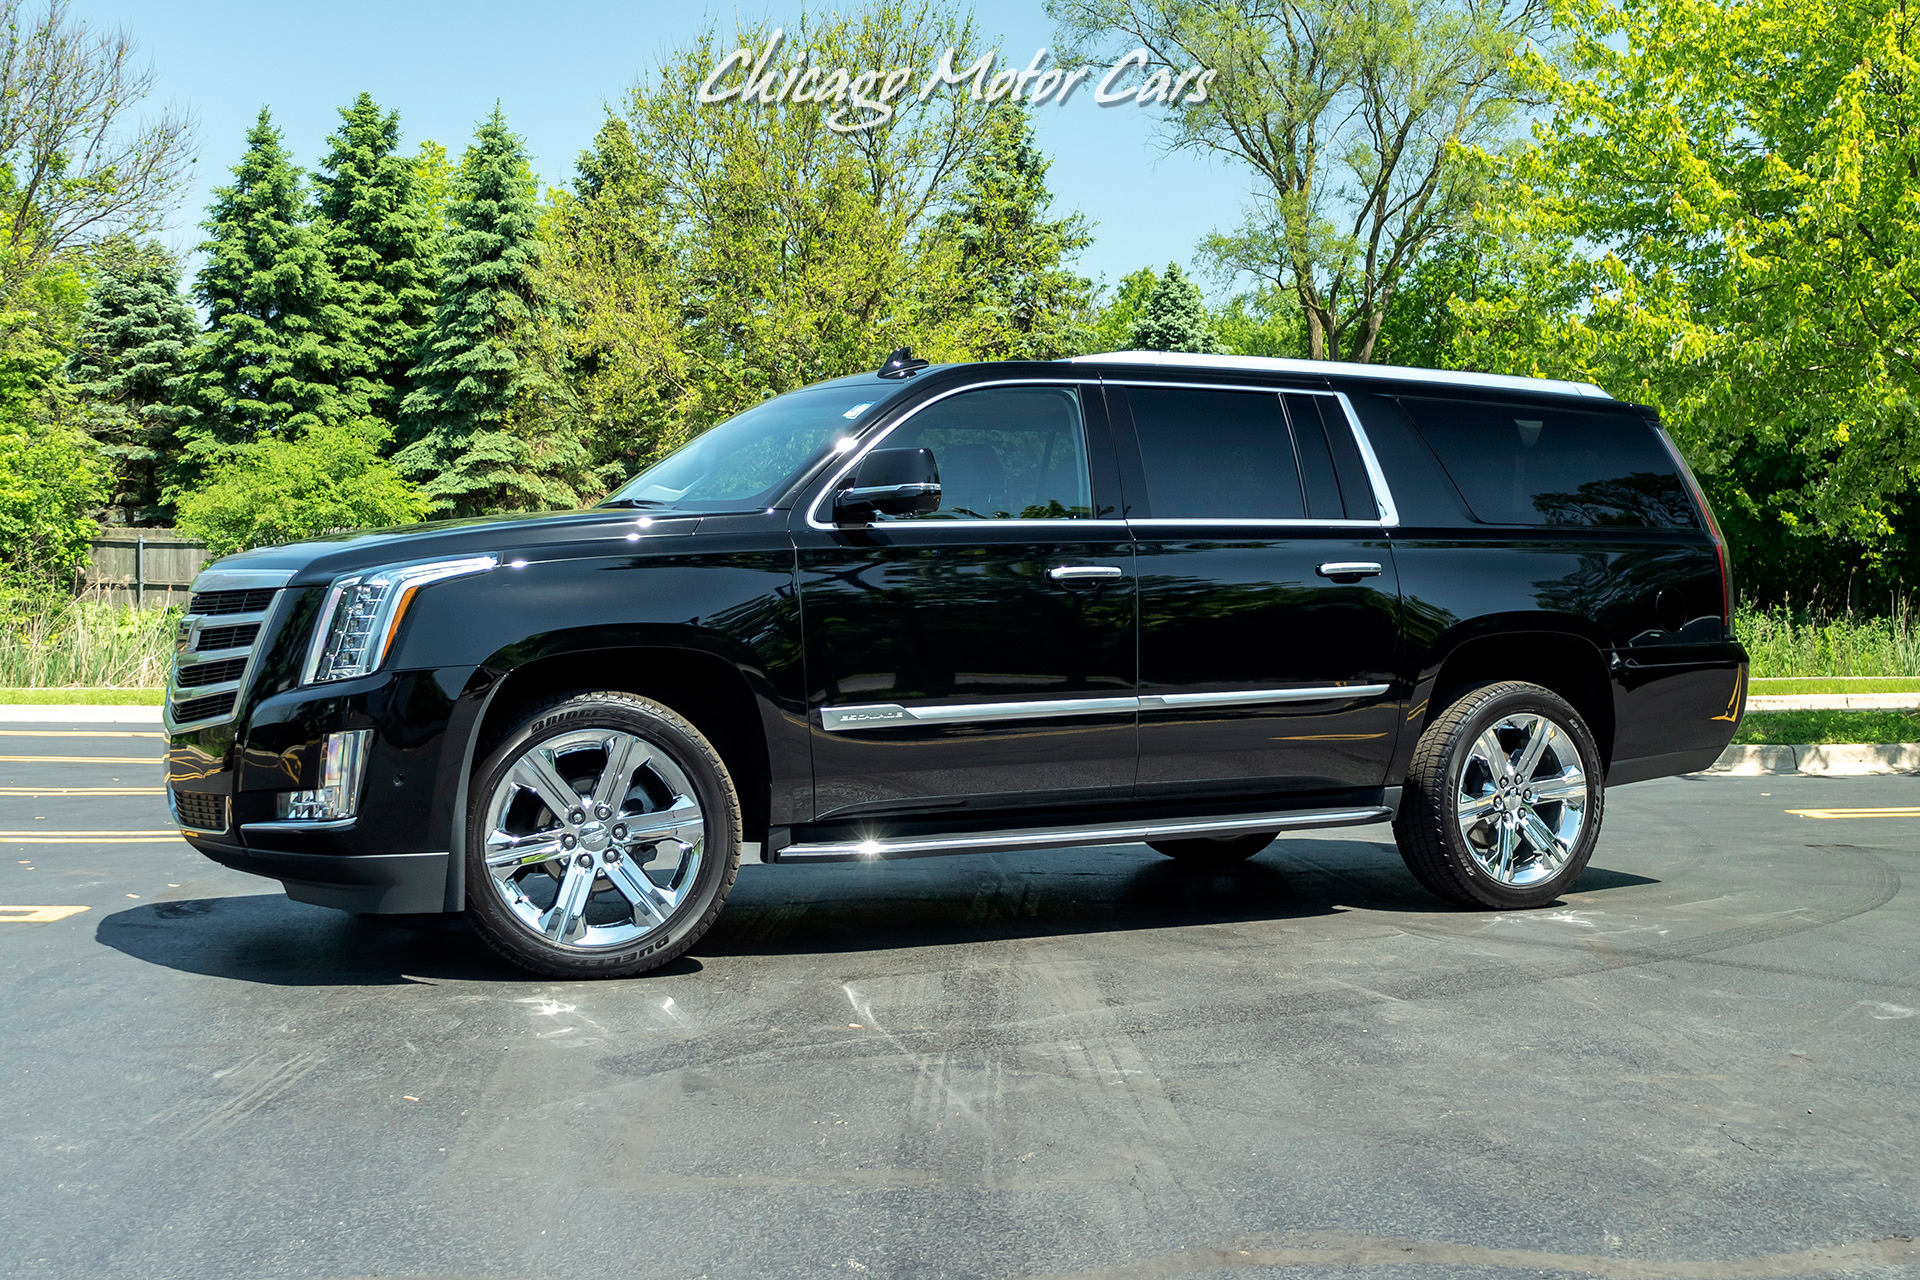 Used 2019 Cadillac Escalade ESV Luxury 4x4 For Sale (Special Pricing) |  Chicago Motor Cars Stock #17051A